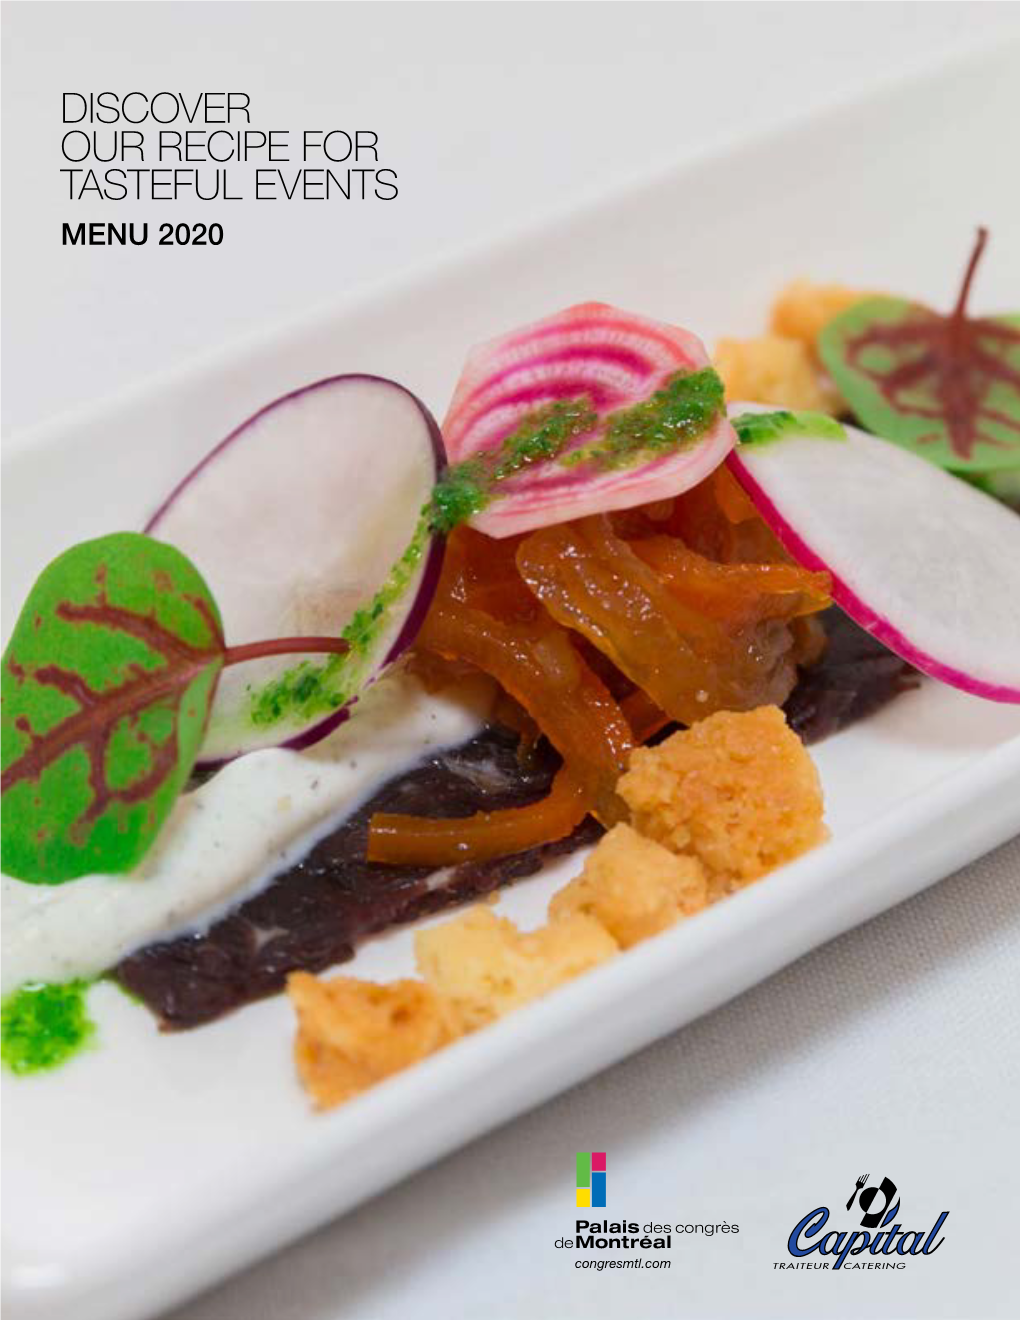 Discover Our Recipe for Tasteful Events Menu 2020